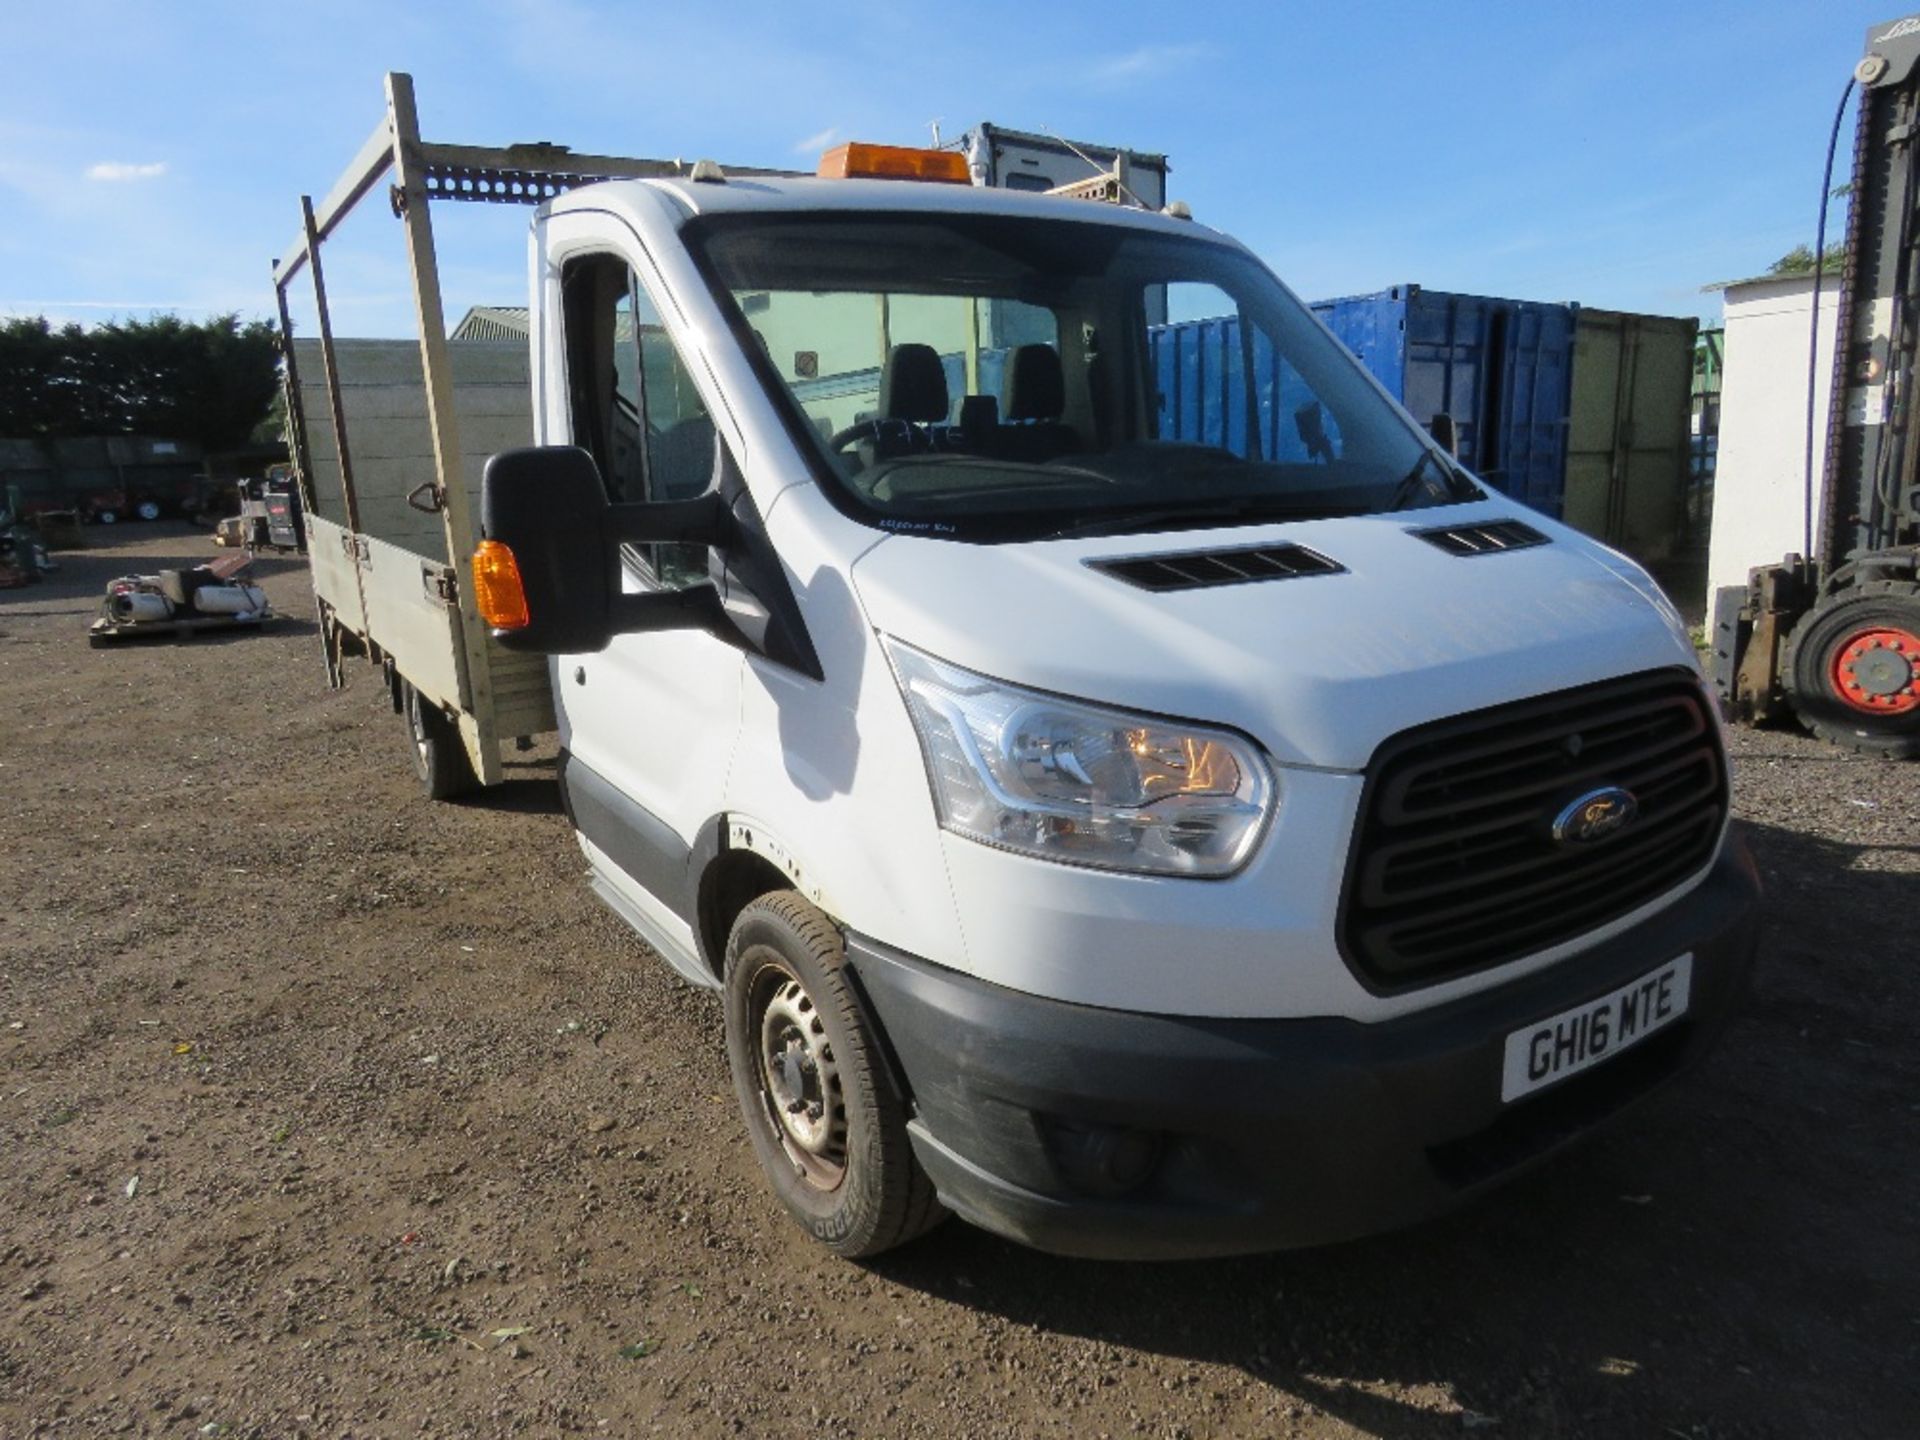 FORD TRANSIT 350 FLAT BED PICKUP TRUCK WITH REAR TAIL LIFT REG:GH16 MTE. WITH V5, OWNED BY VENDOR FR